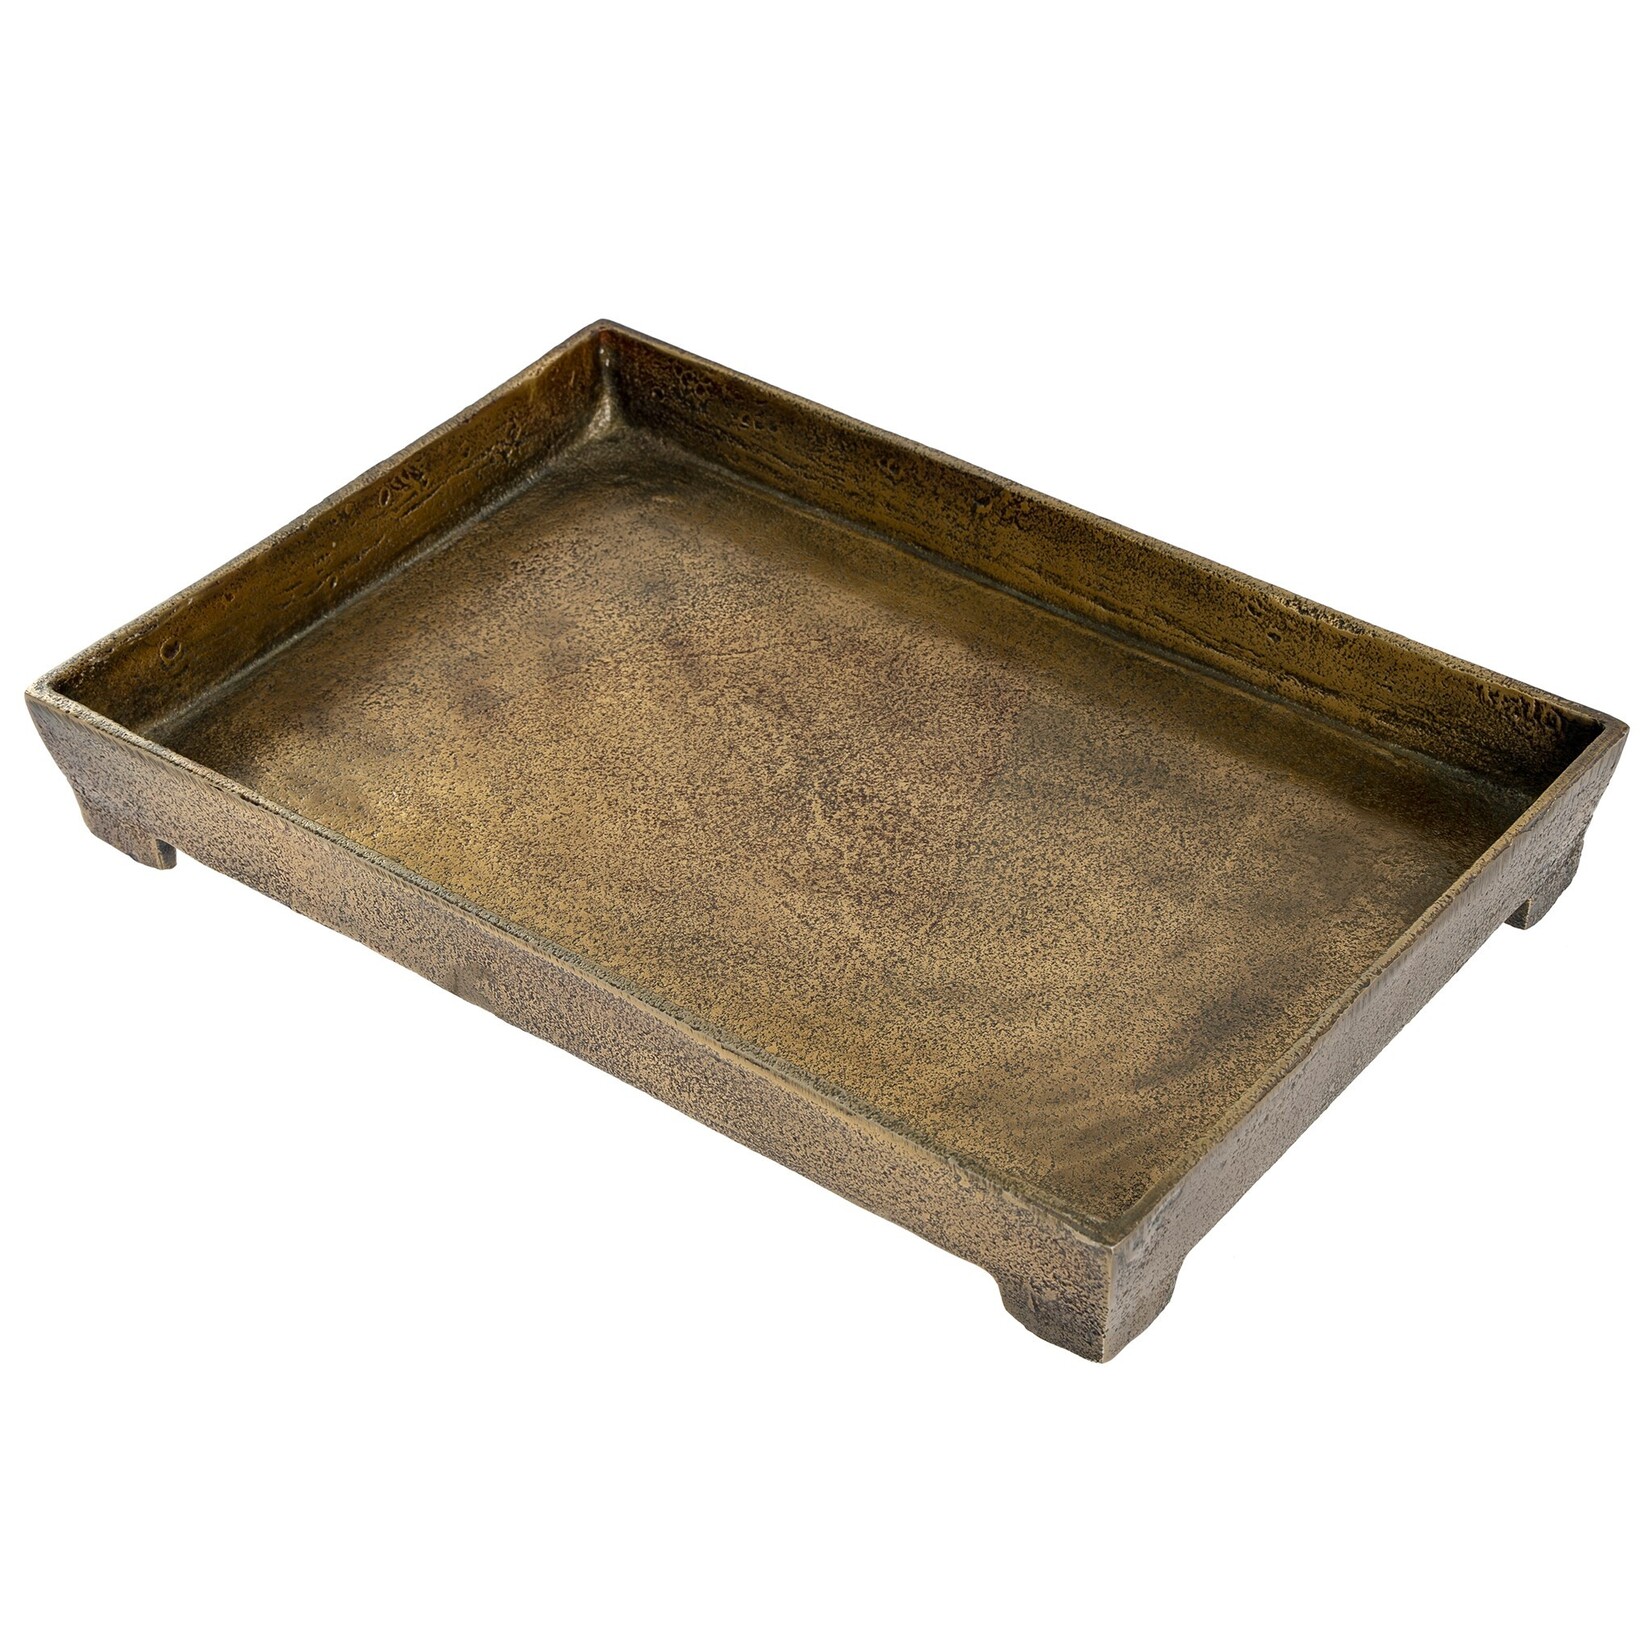 Footed Bronze Coffee Table Tray - Large